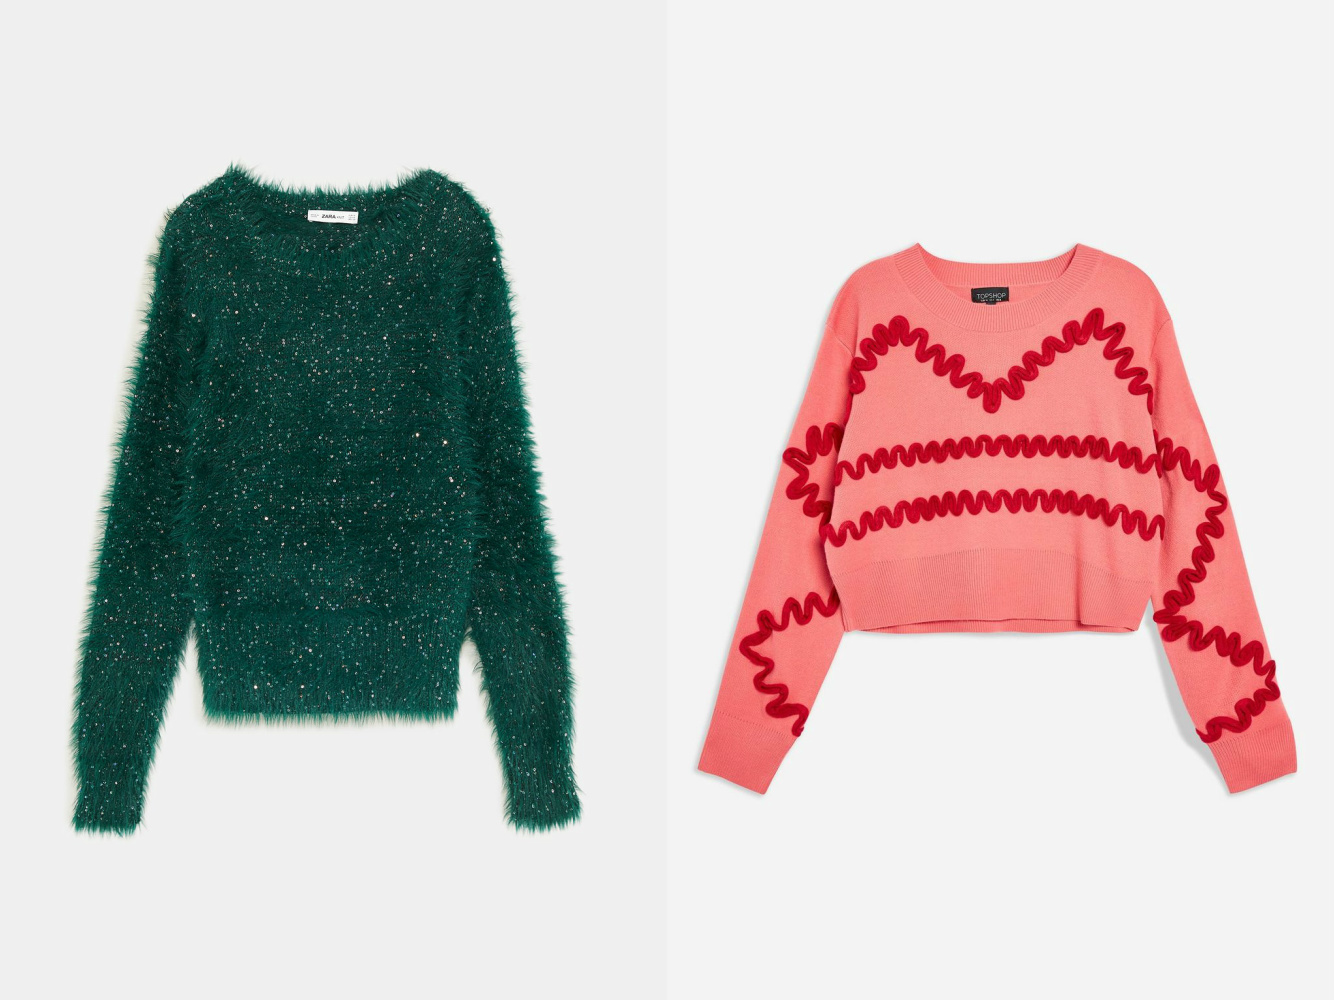 These Fall 2018 Sweater Trends Will Give You All Of The Coziest Hygge Vibes